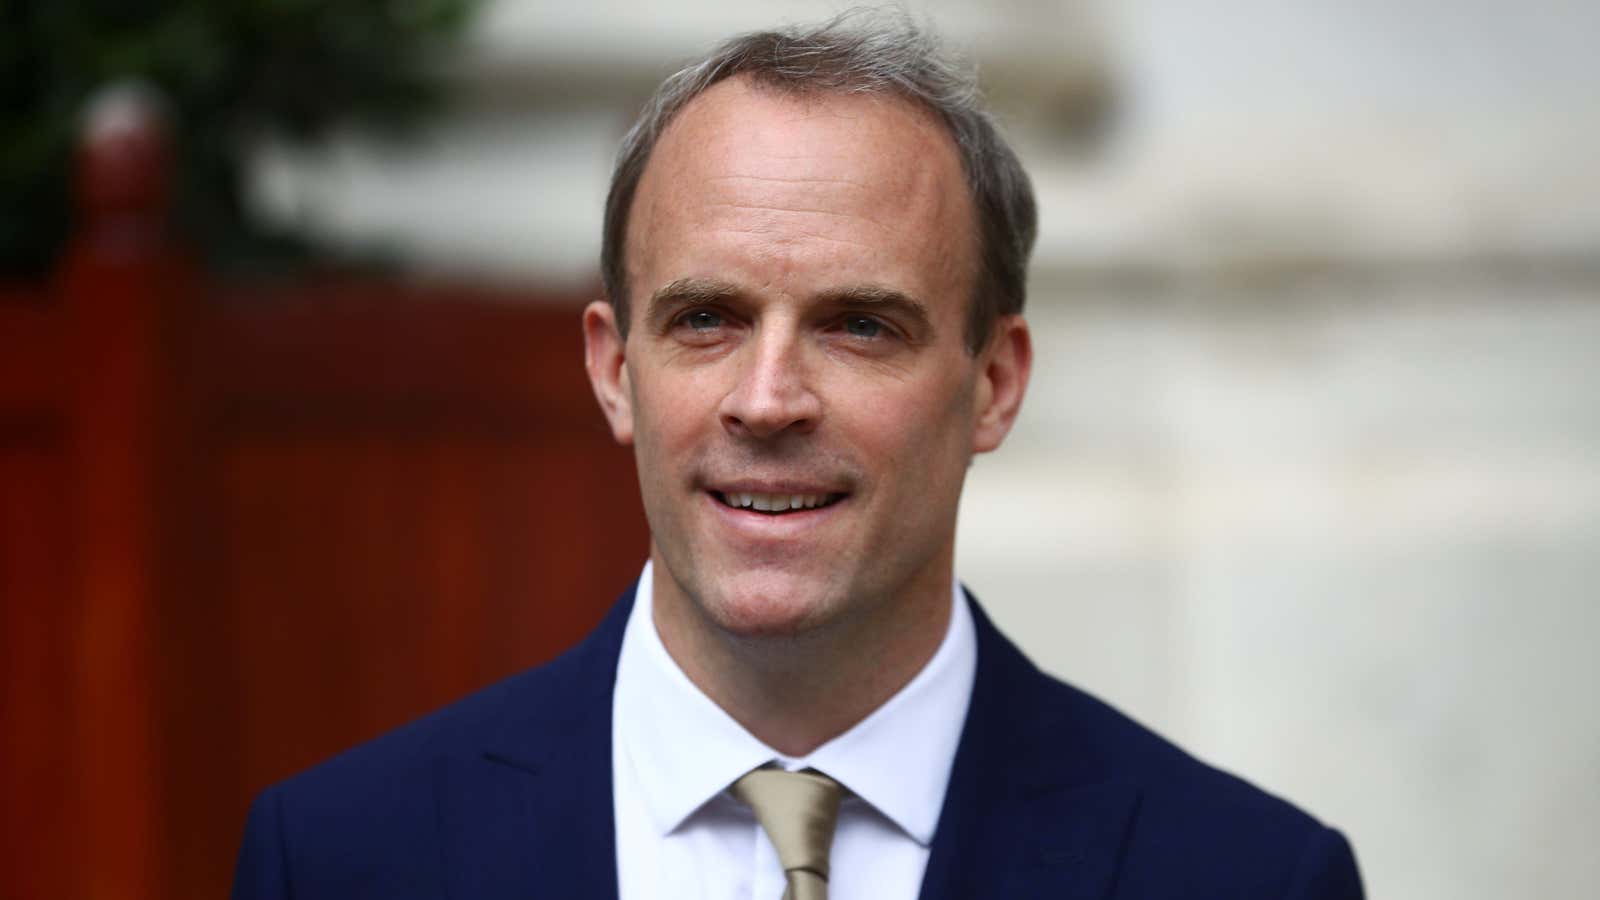 Britain’s foreign secretary Dominic Raab makes a statement on Hong Kong’s national security legislation